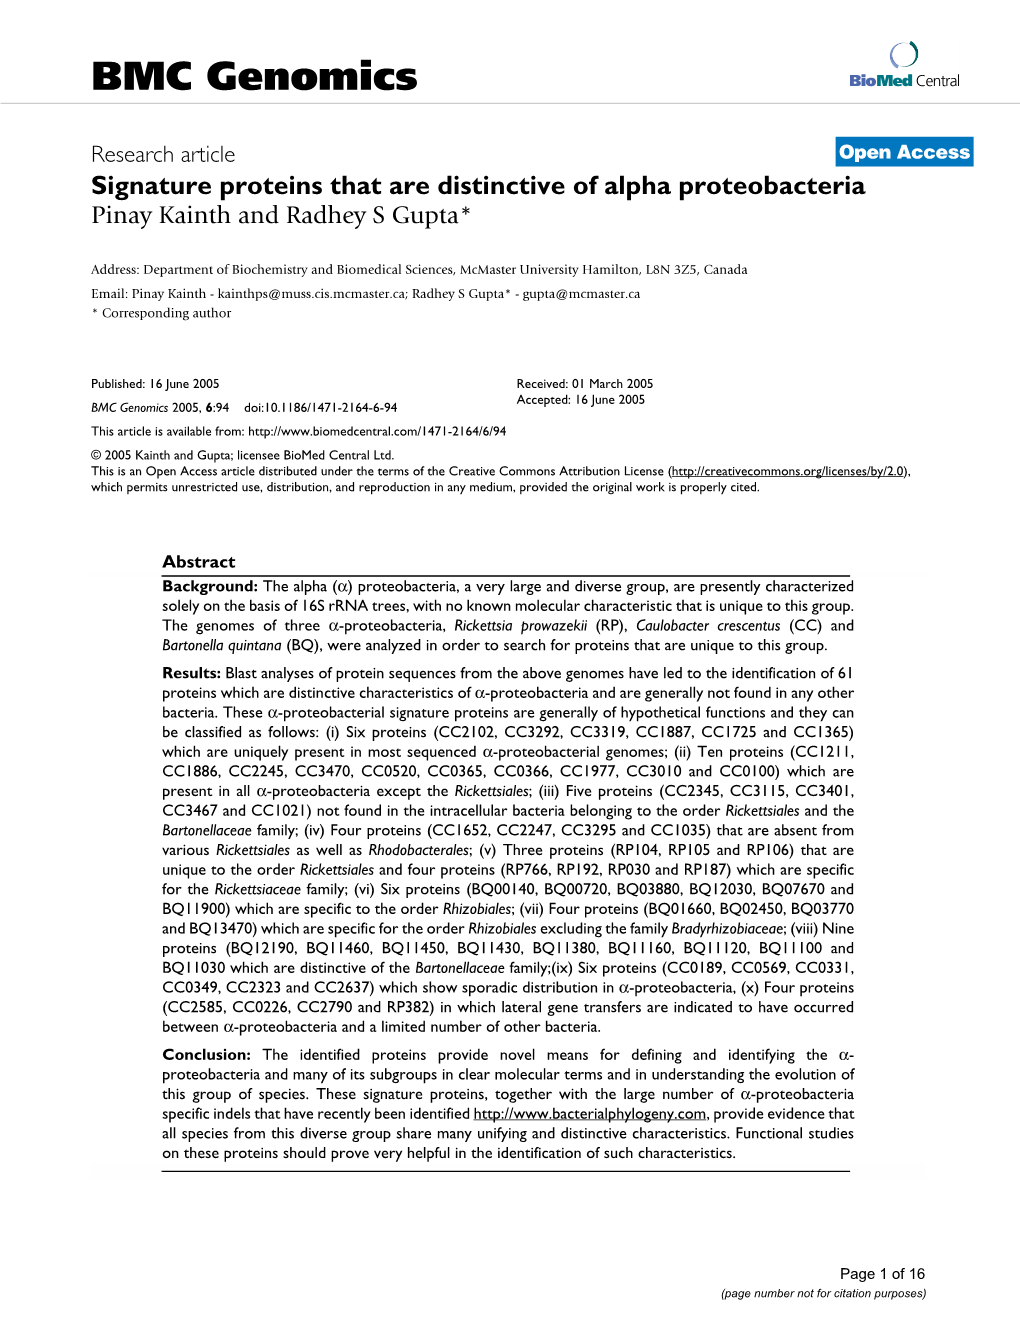 Signature Proteins That Are Distinctive of Alpha Proteobacteria Pinay Kainth and Radhey S Gupta*